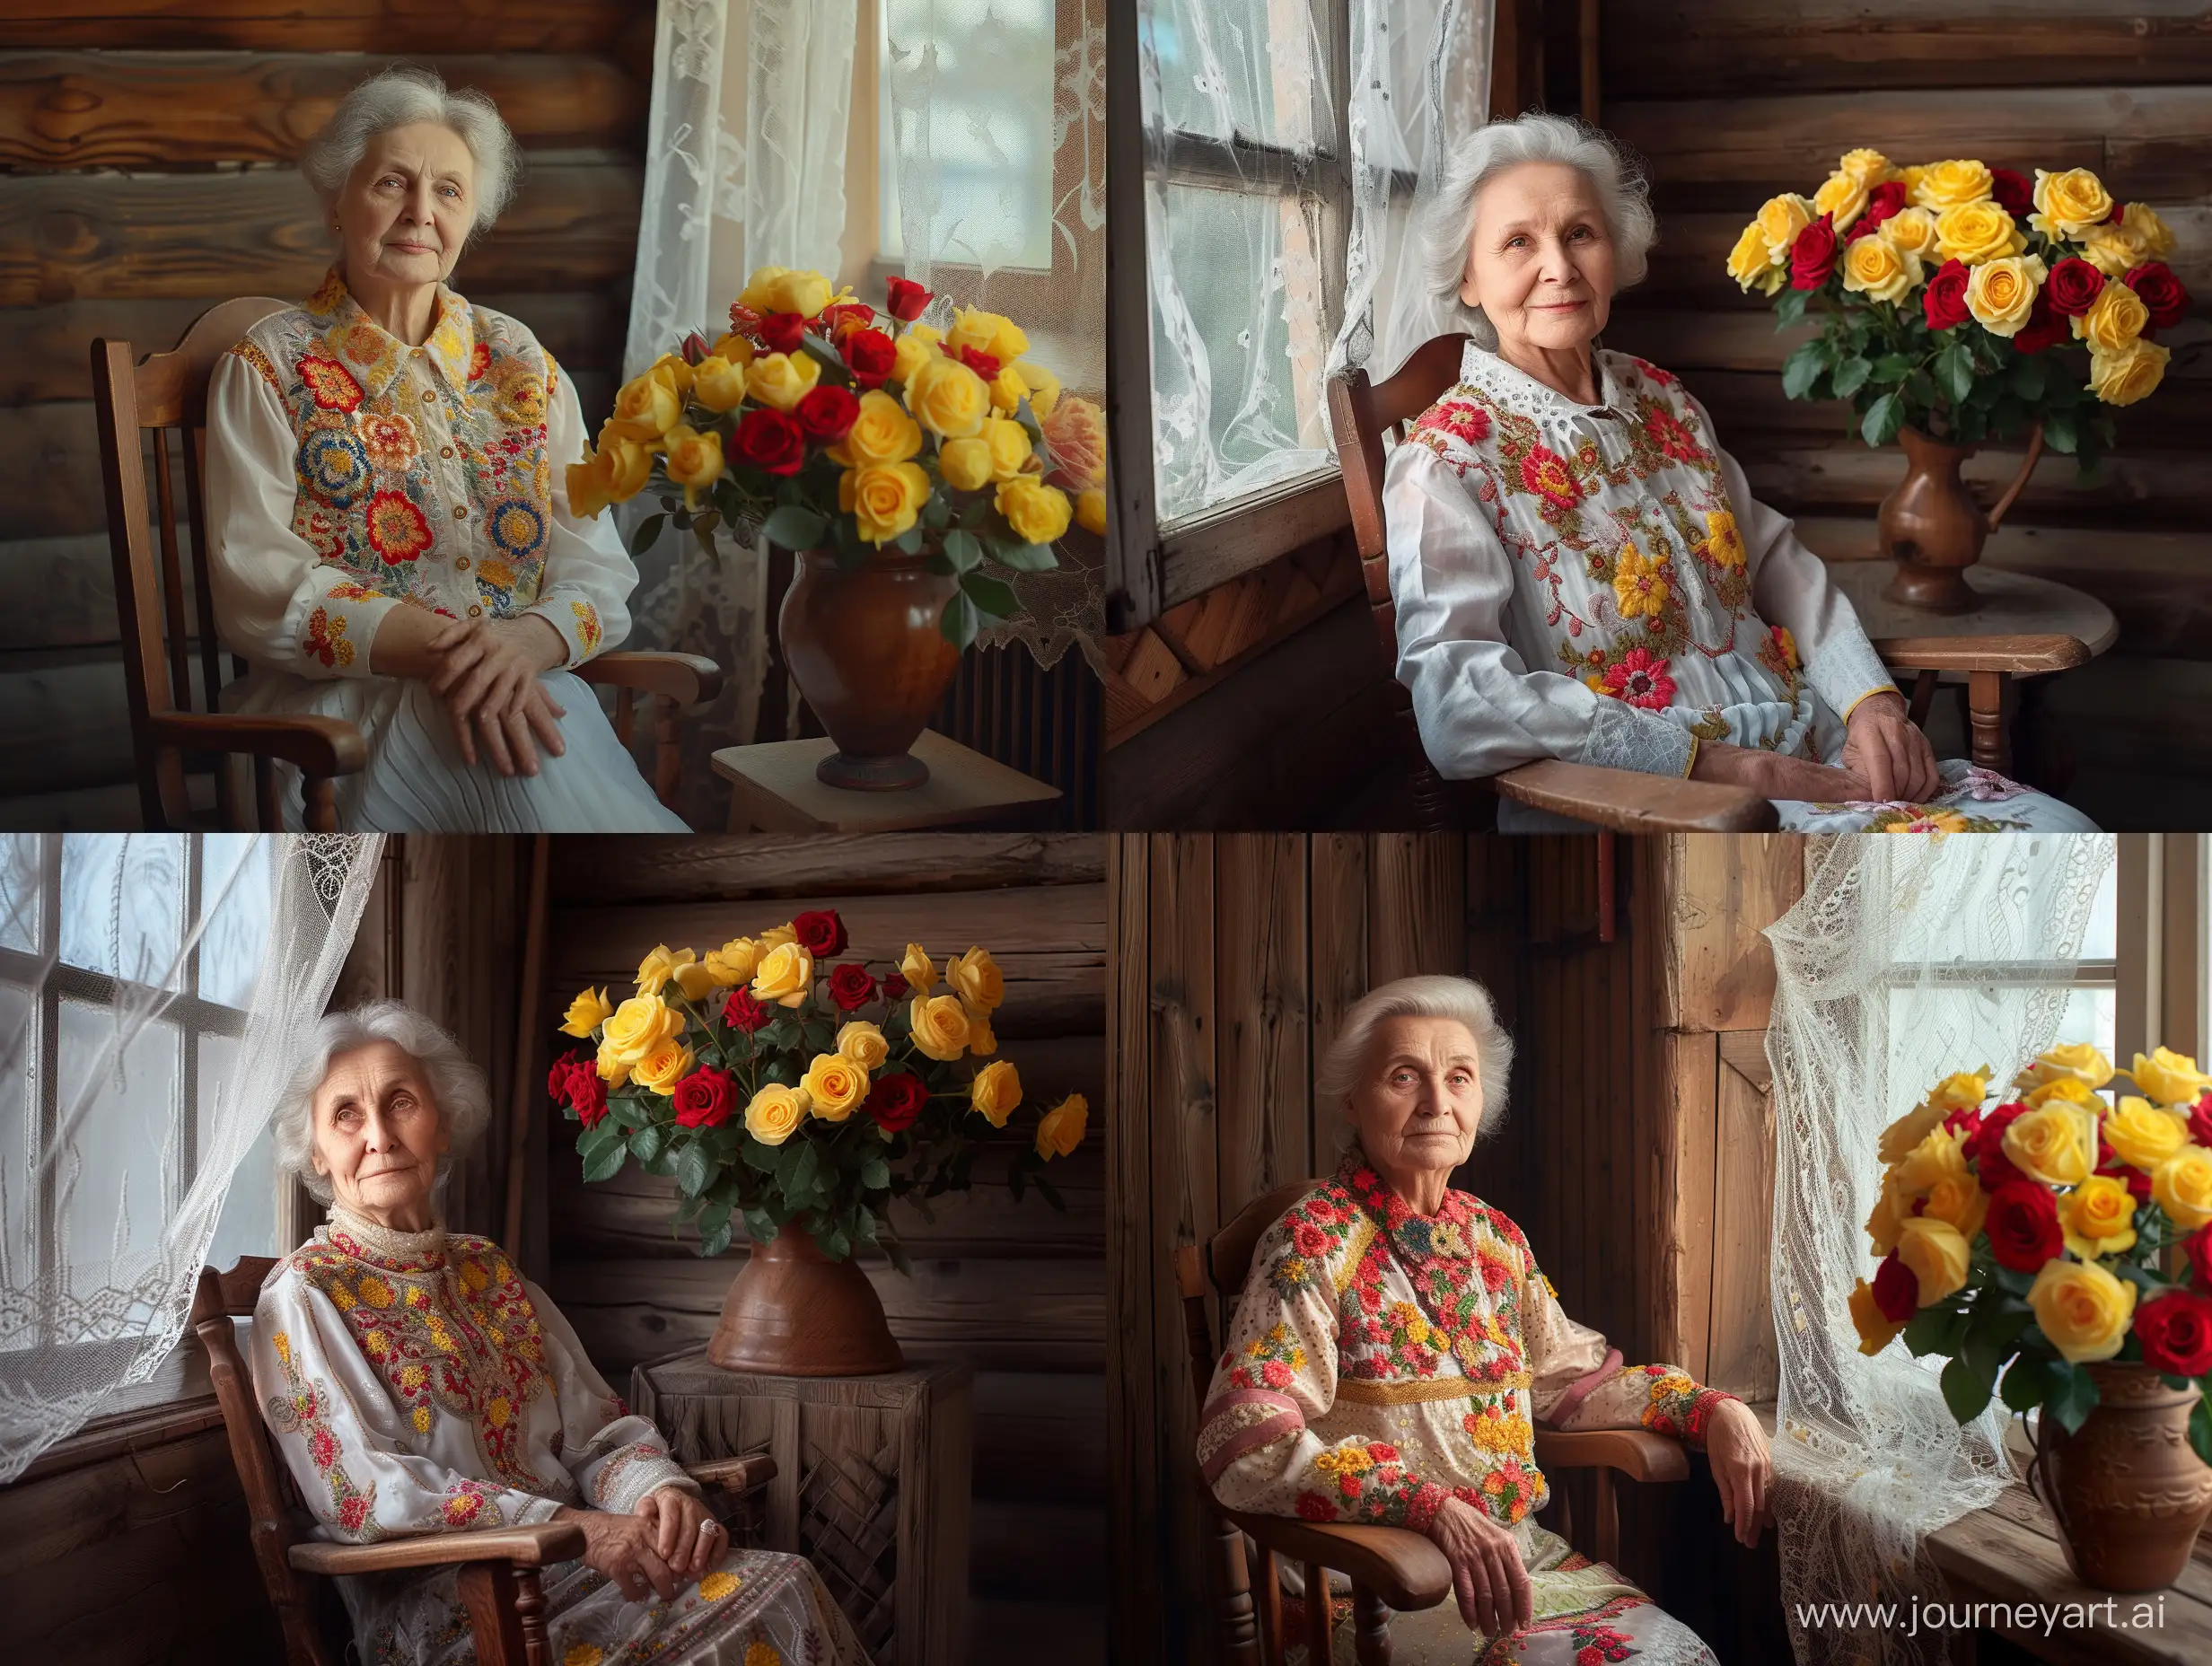 Elderly-Woman-Admiring-Roses-by-Open-Window-in-Traditional-Dress